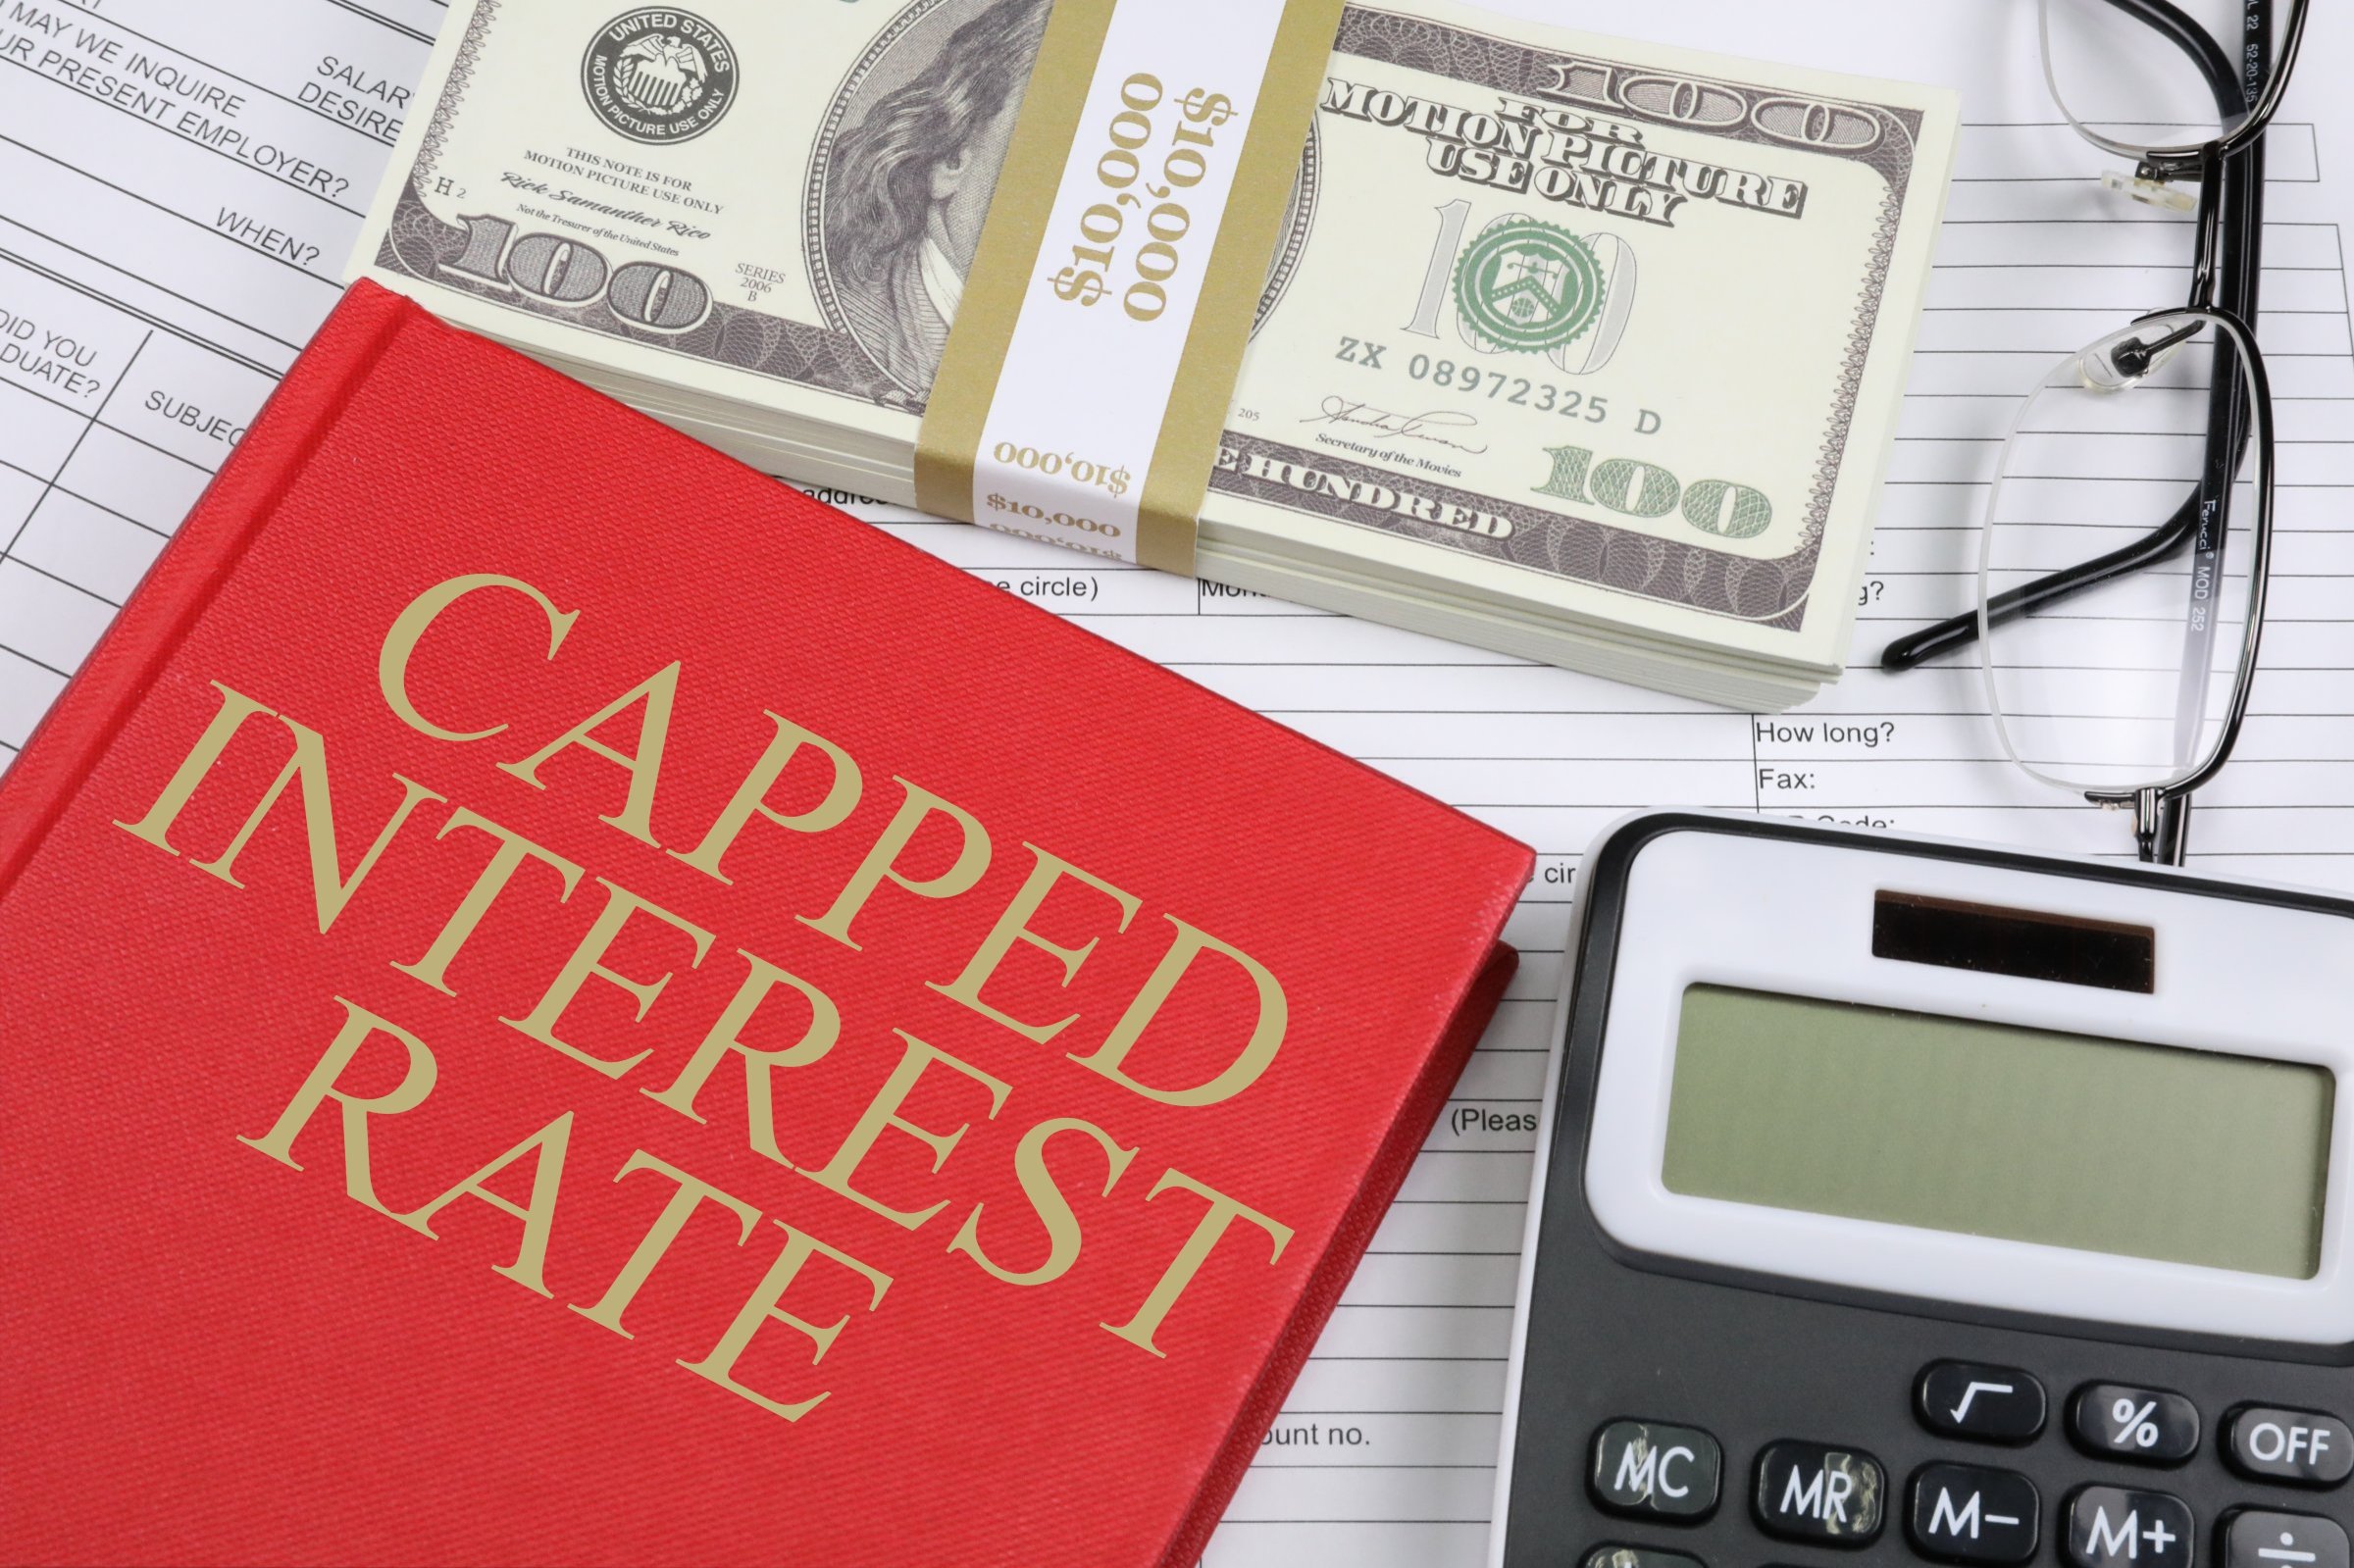 capped interest rate